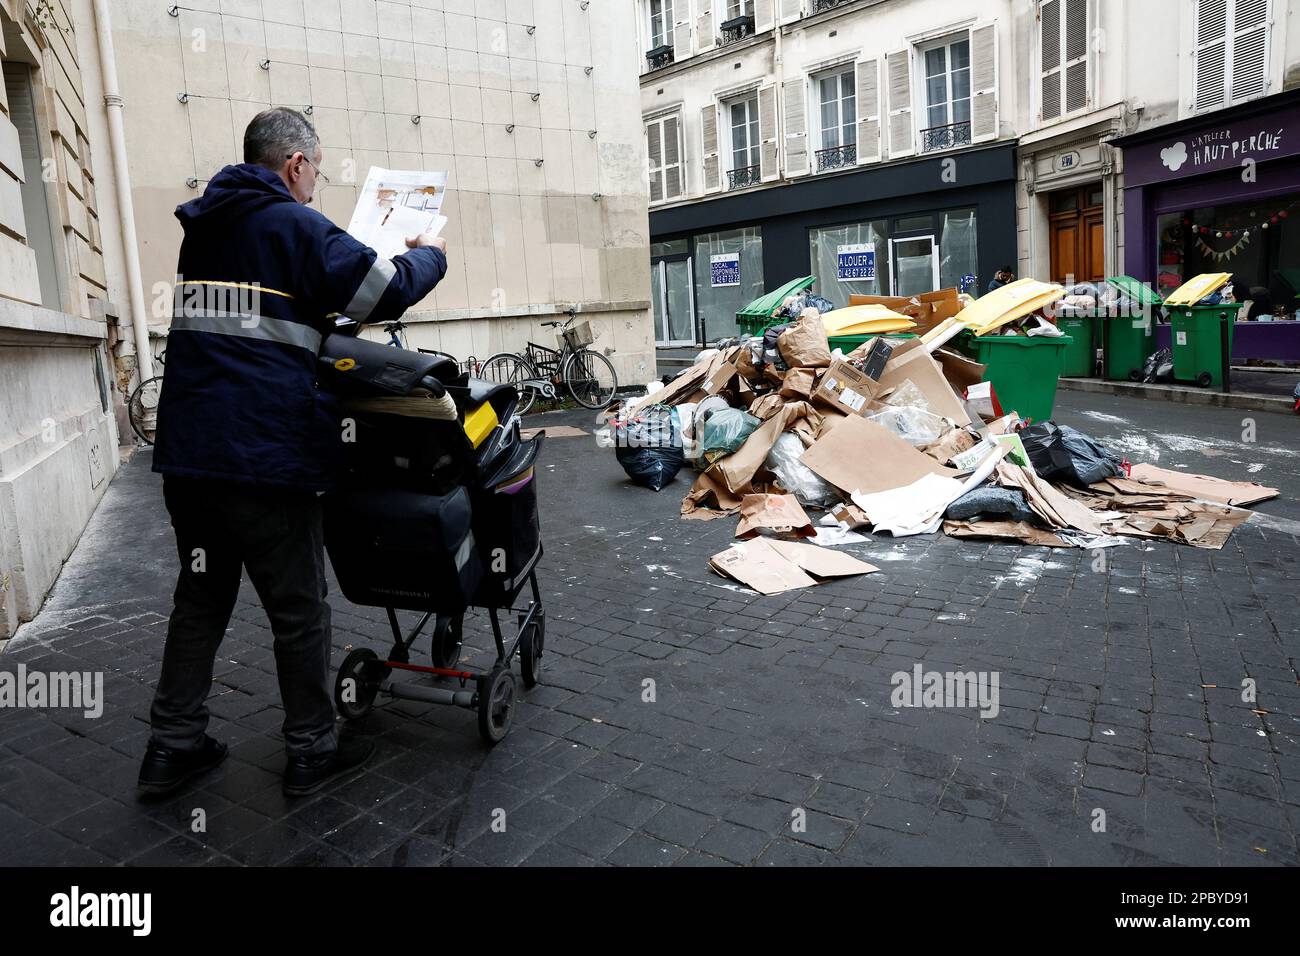 People walk in a street where garbage cans are overflowing, as garbage has not been collected, in Paris, France March 13, 2023. REUTERS/Benoit Tessier Stock Photo